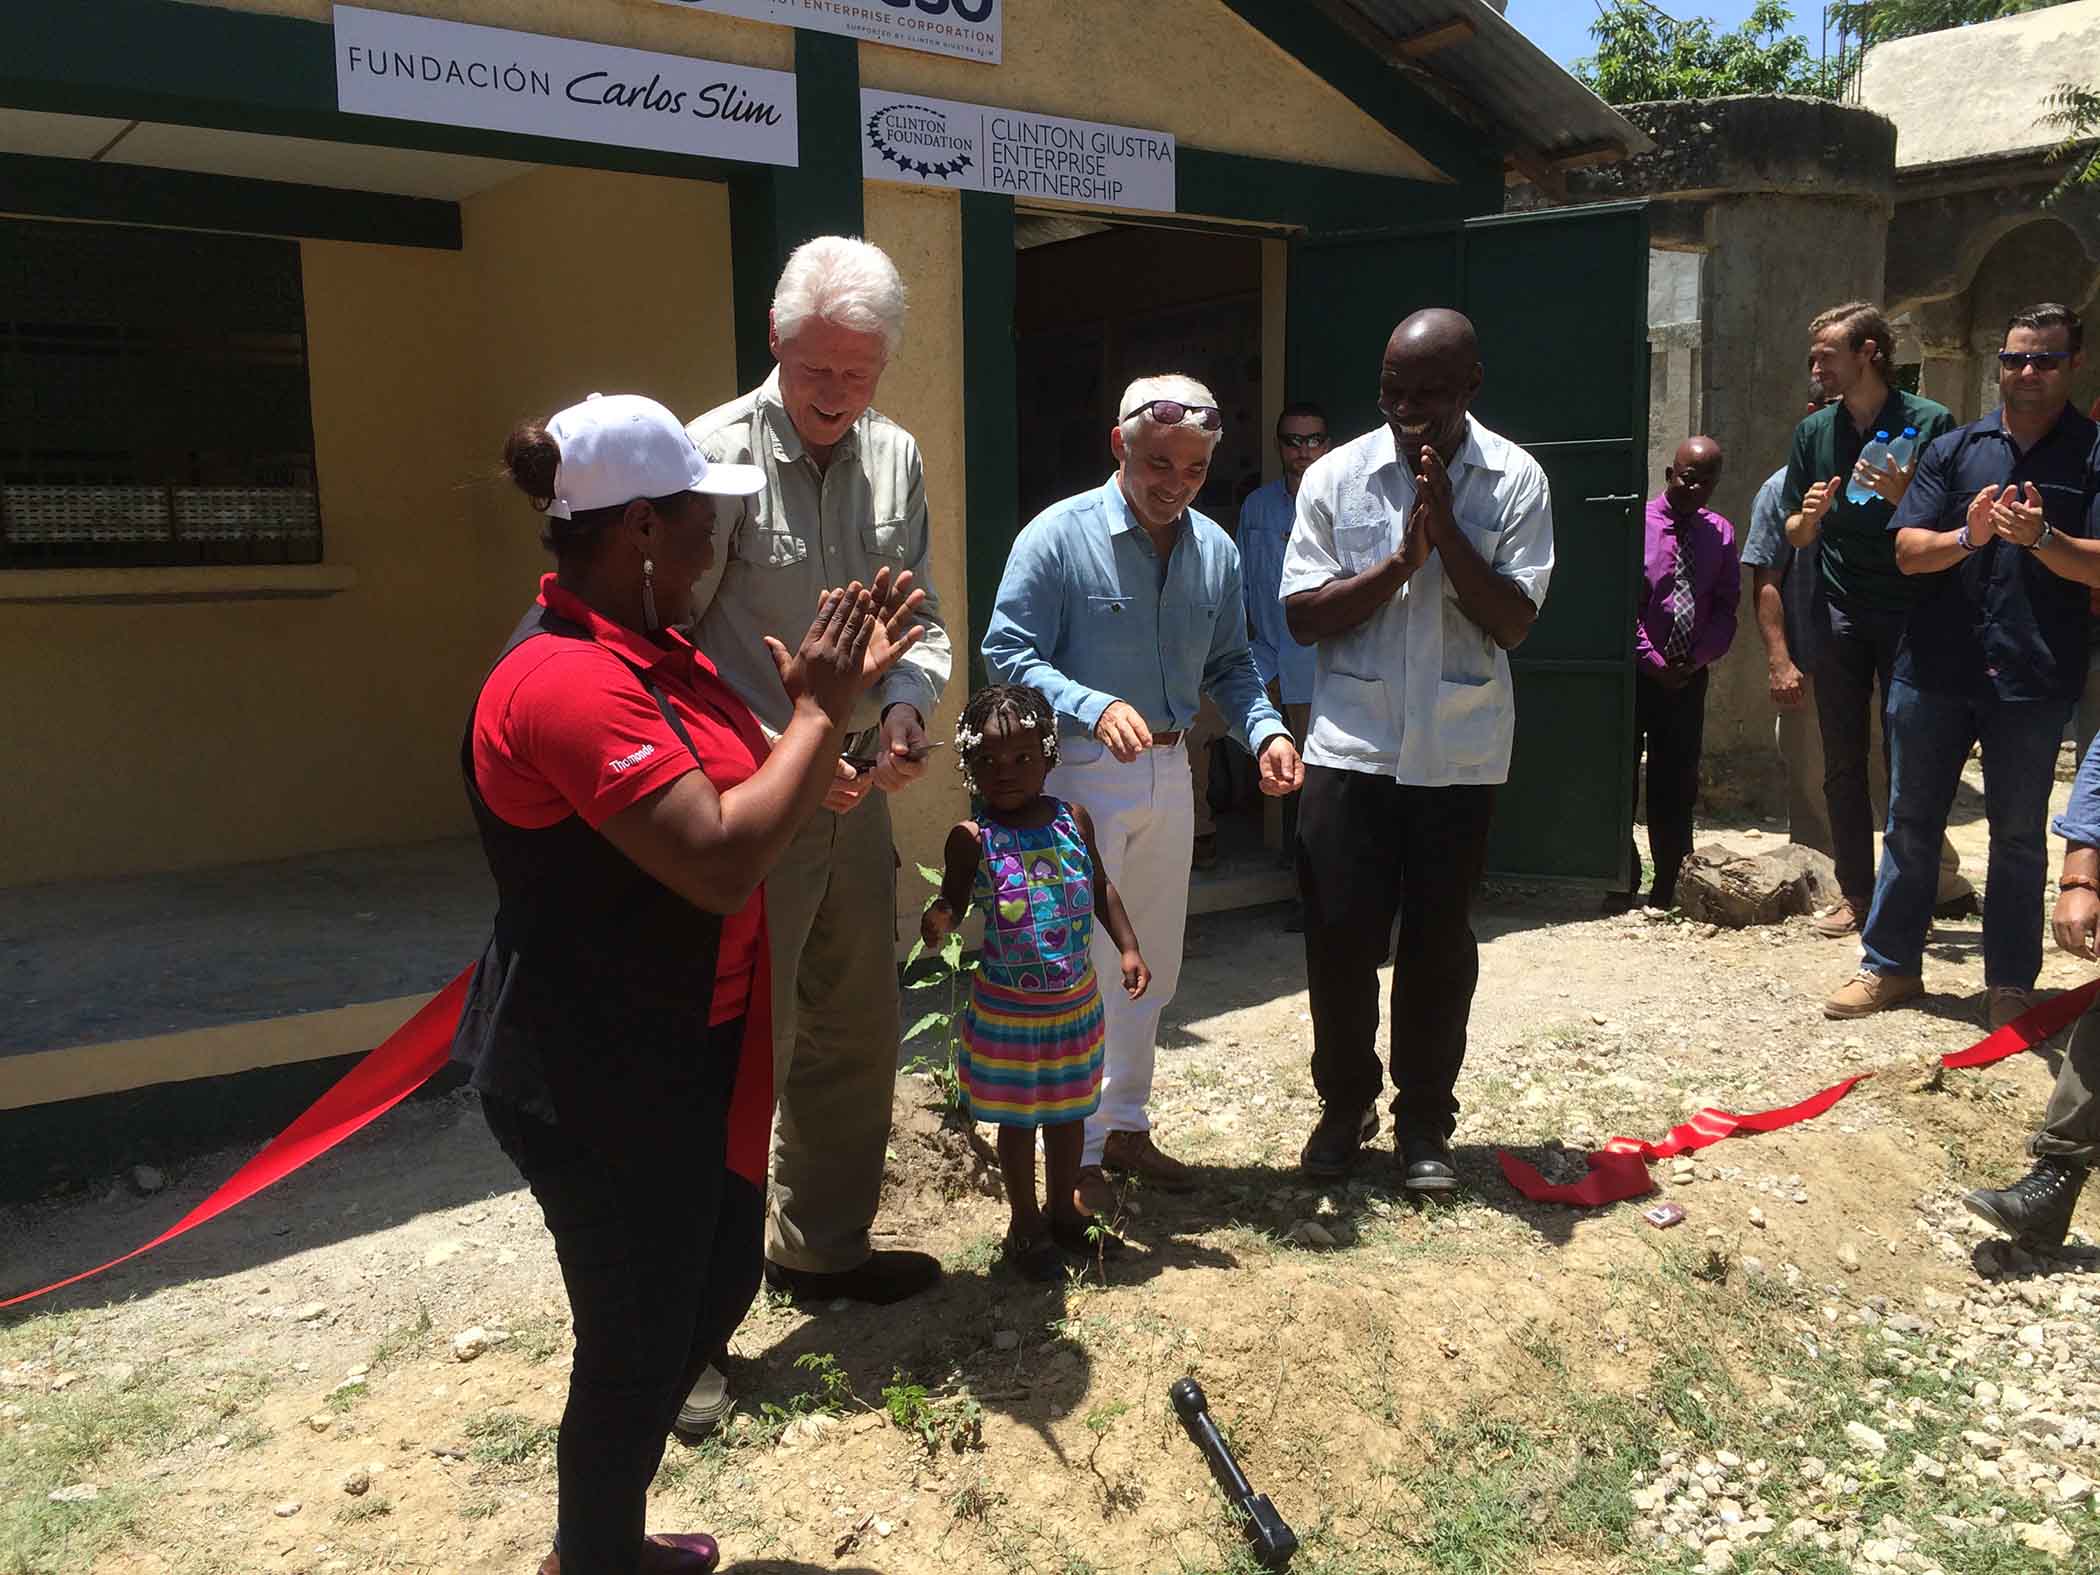 Former U.S. President Bill Clinton gathers with a group of townspeople from Tierra Muscady, Haiti, where he and philanthropist Frank Giustra launched the new Acceso Peanut Enterprise Corp., which is designed to improve the livelihoods of more than 12,000 smallholder peanut farmers.